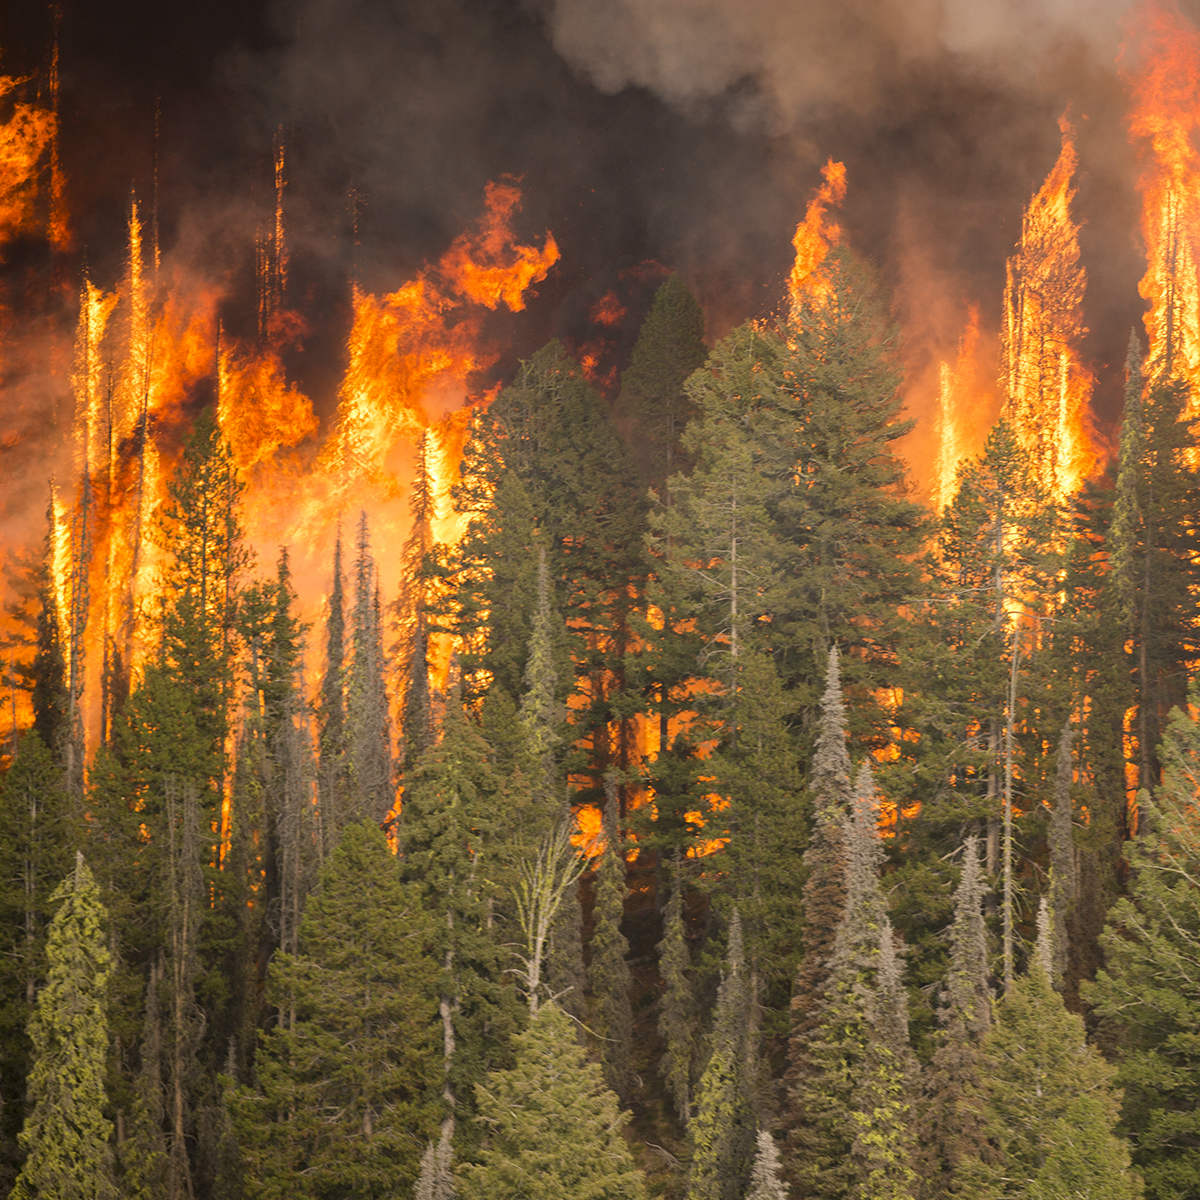 A wildfire moves through a forest.